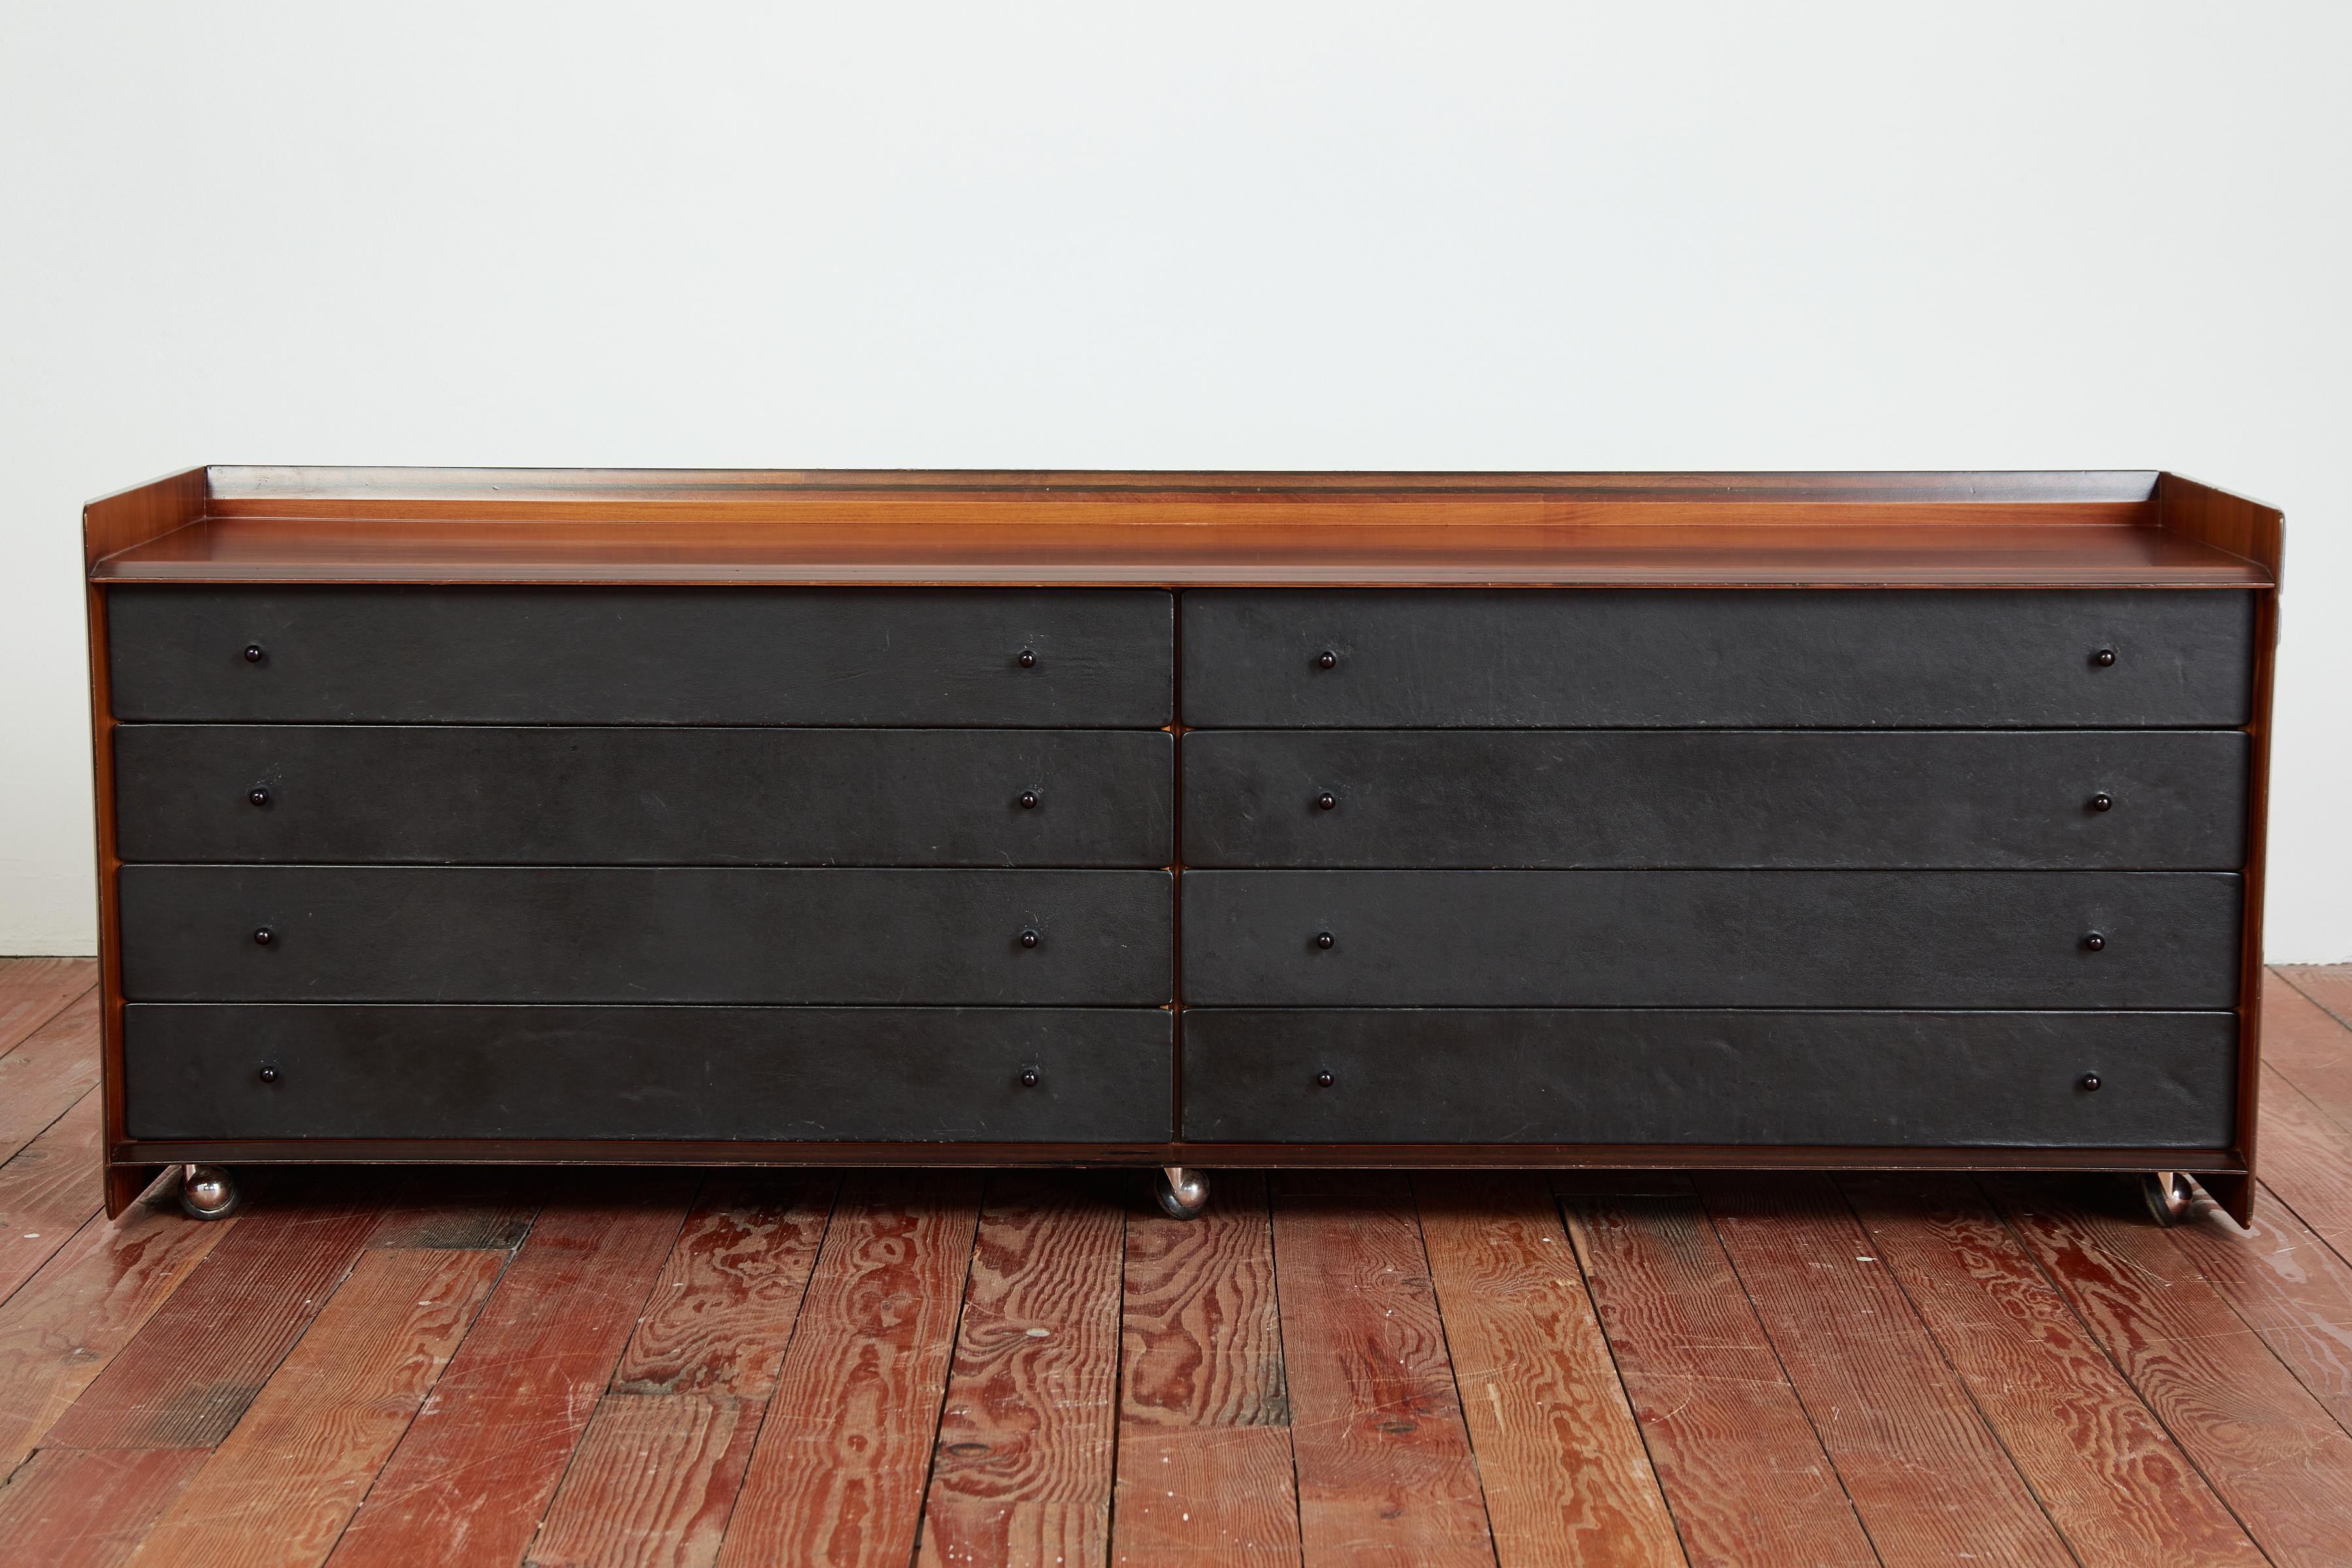 Rare Chest of drawers by Afra & Tobia Scarpa in walnut and black leather drawers. Manufactured for the Artona series for Maxalto production. 
Italy, circa 1975 

Beautiful grain in walnut 
Cabinet sits on original chrome casters.

